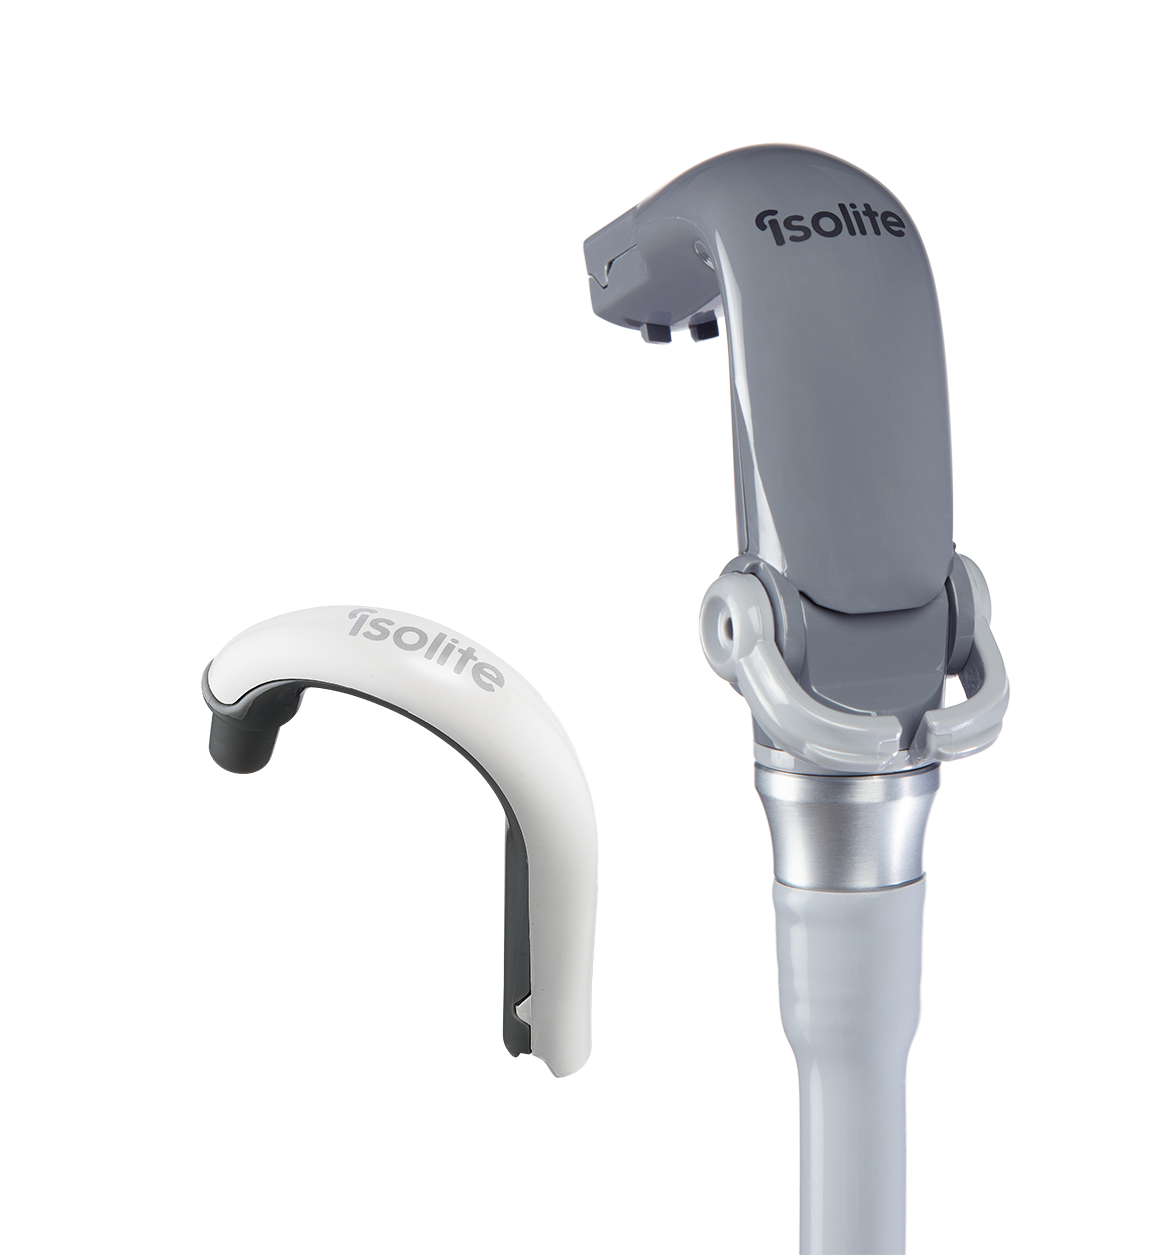 Zyris Isolite Dental Isolation Systems